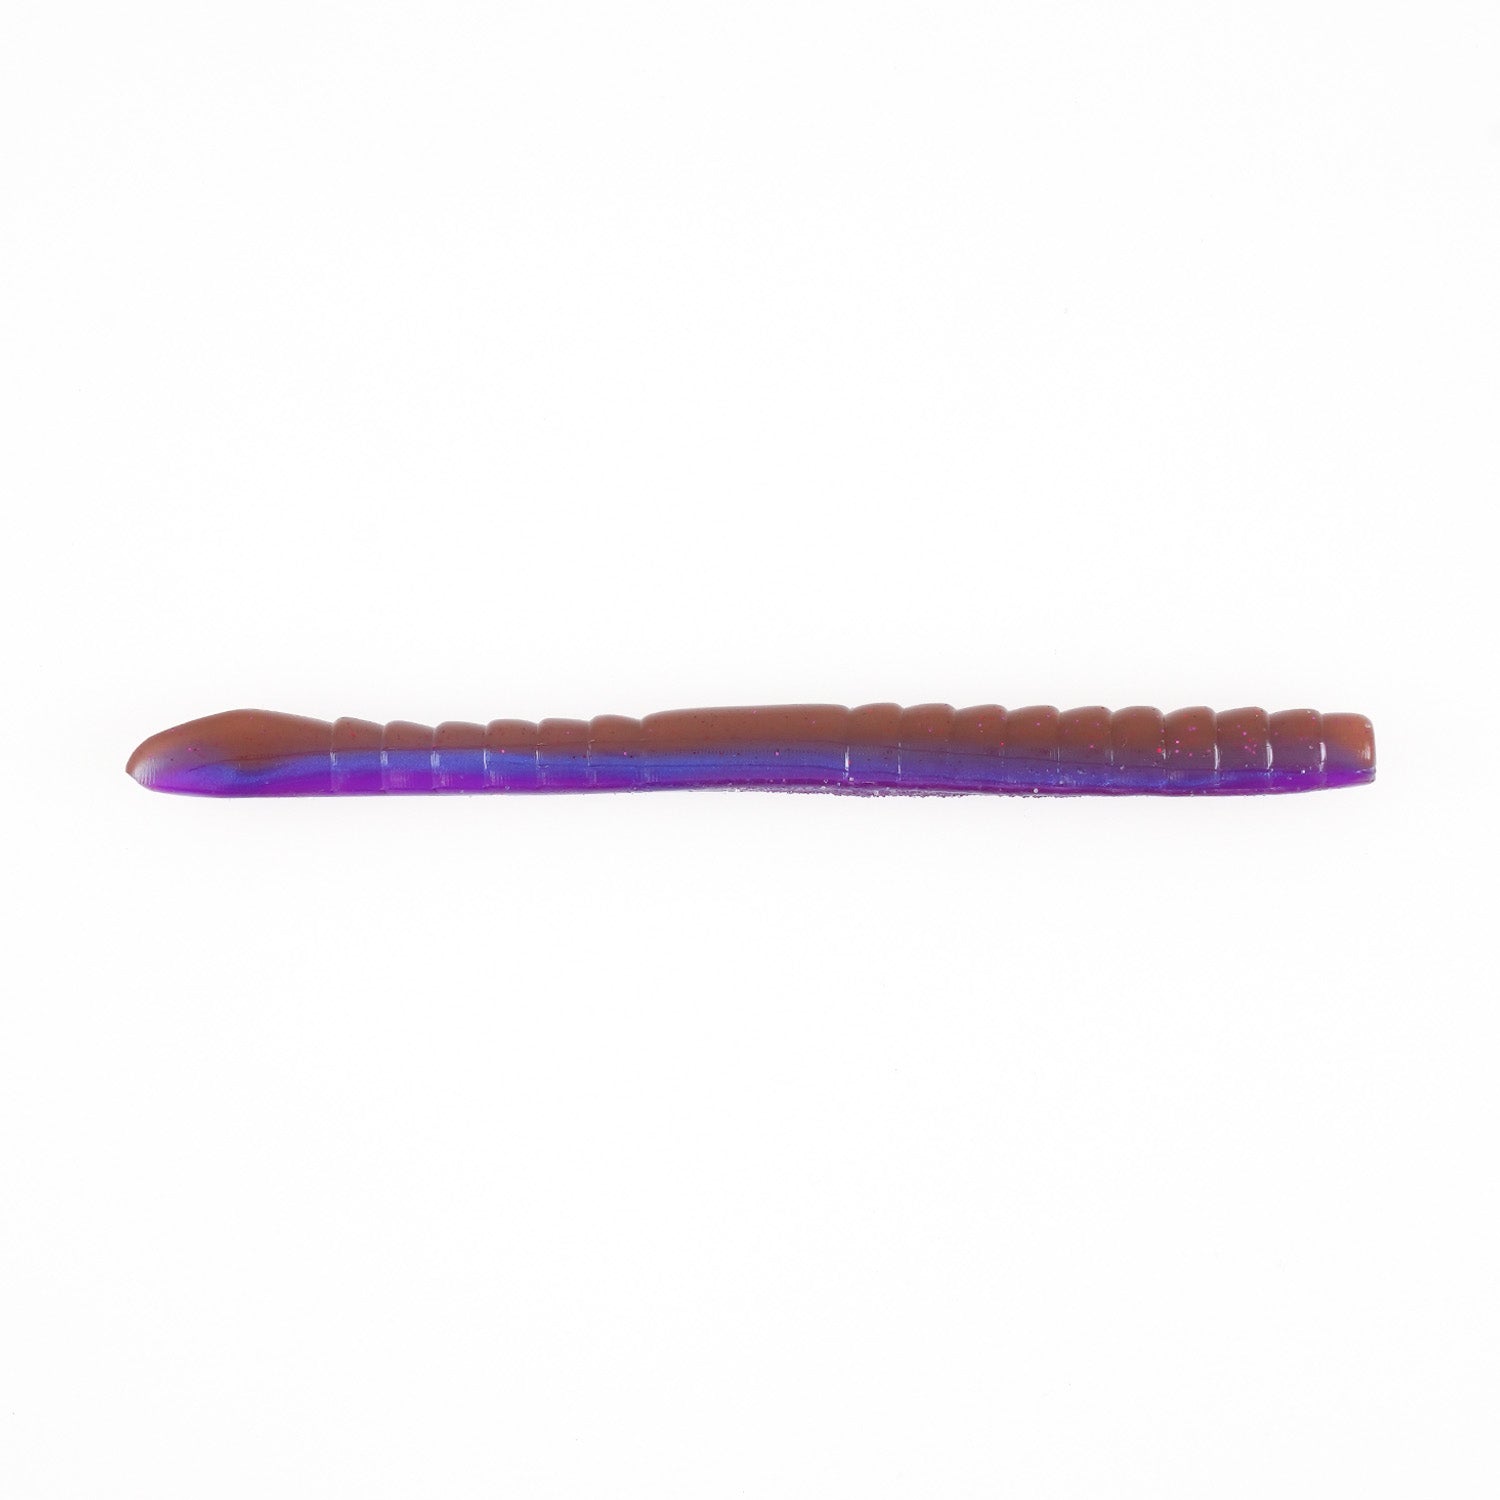 Missile Baits 6 Magic Worm by Roboworm 14pk (12 Colors to Choose From)